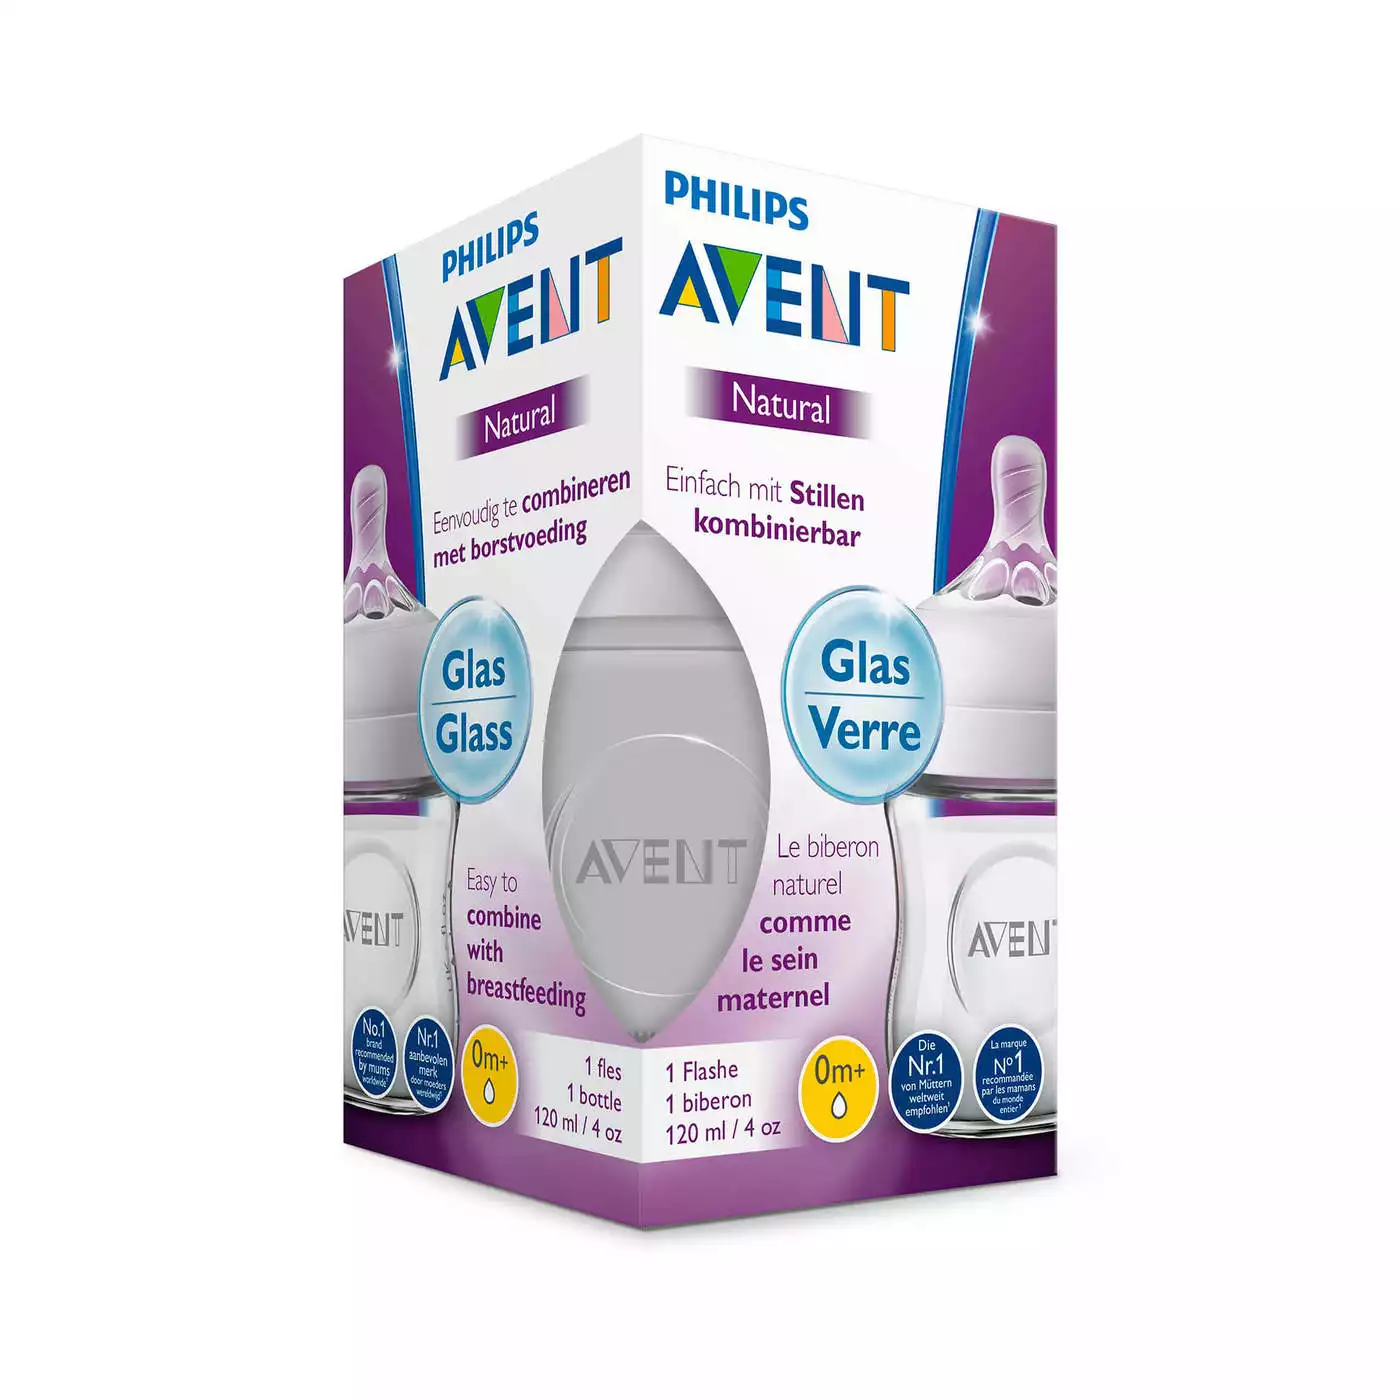 Natural Glasflasche 120 ml PHILIPS AVENT 2000576151401 8